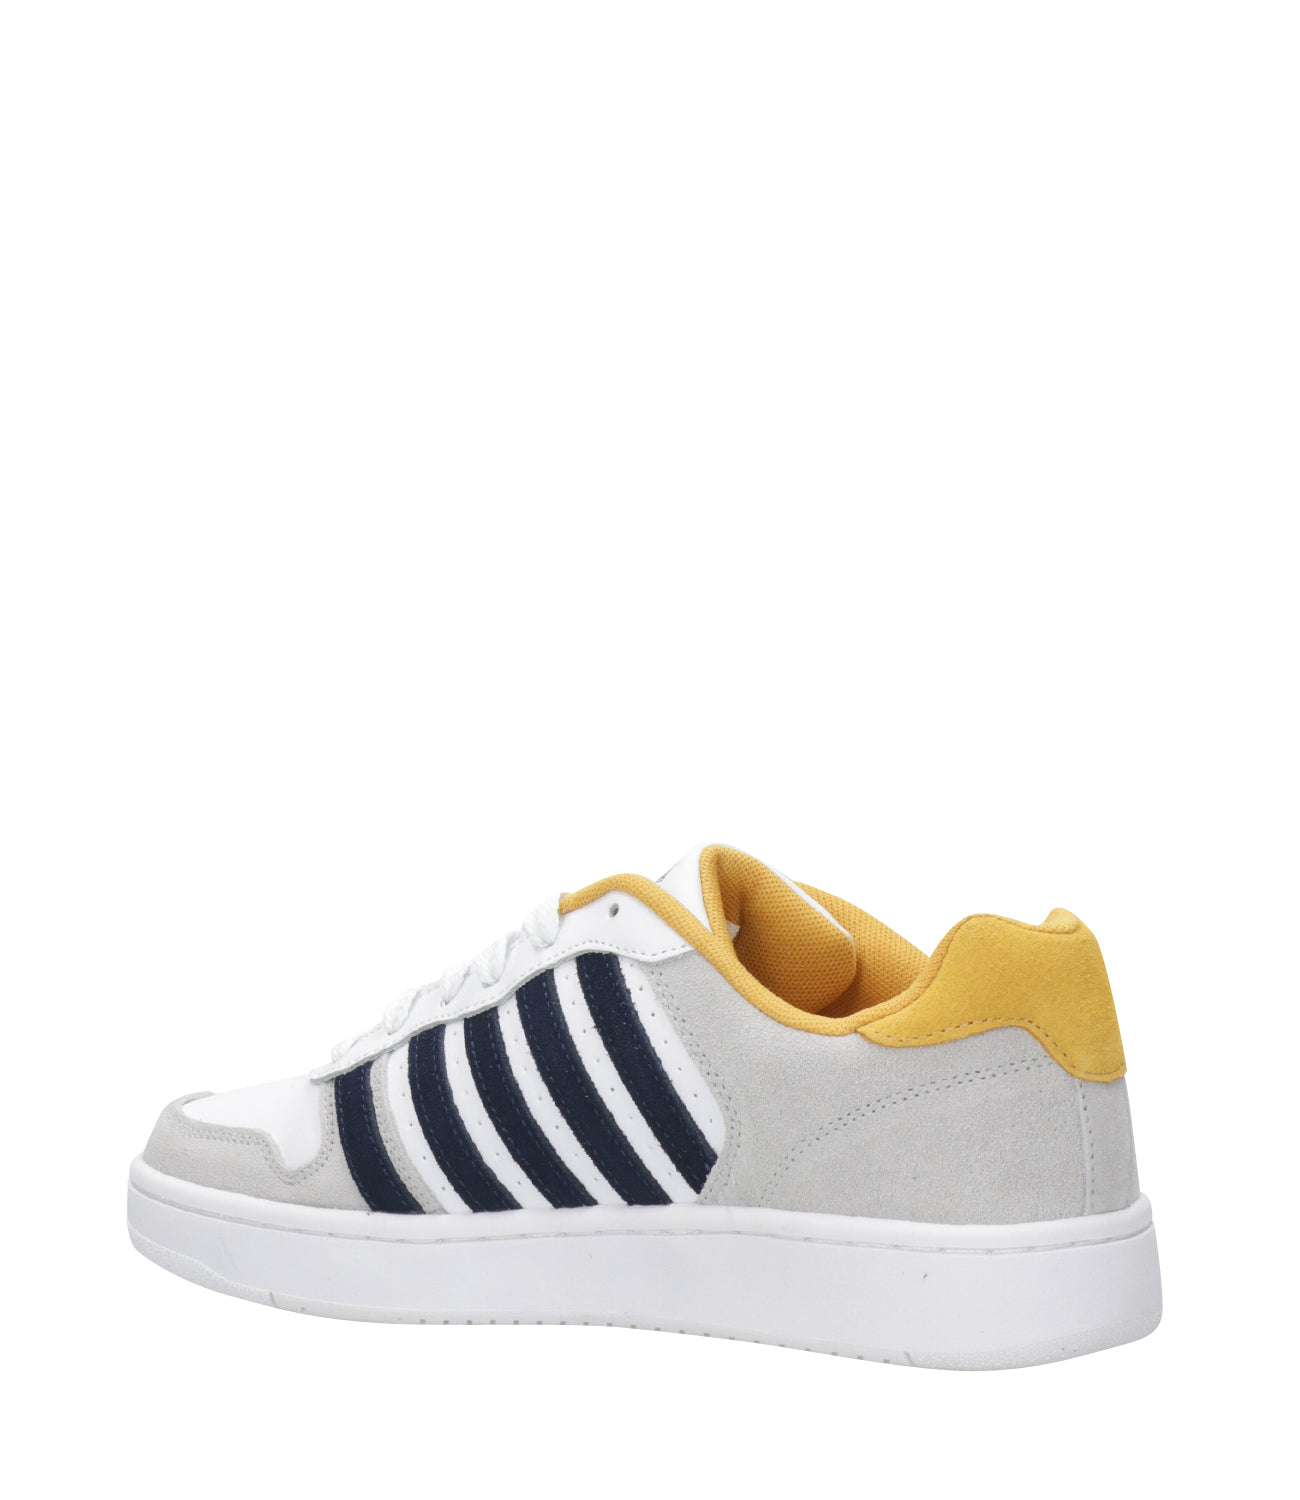 Sneakers | Court Palisades White and Blue